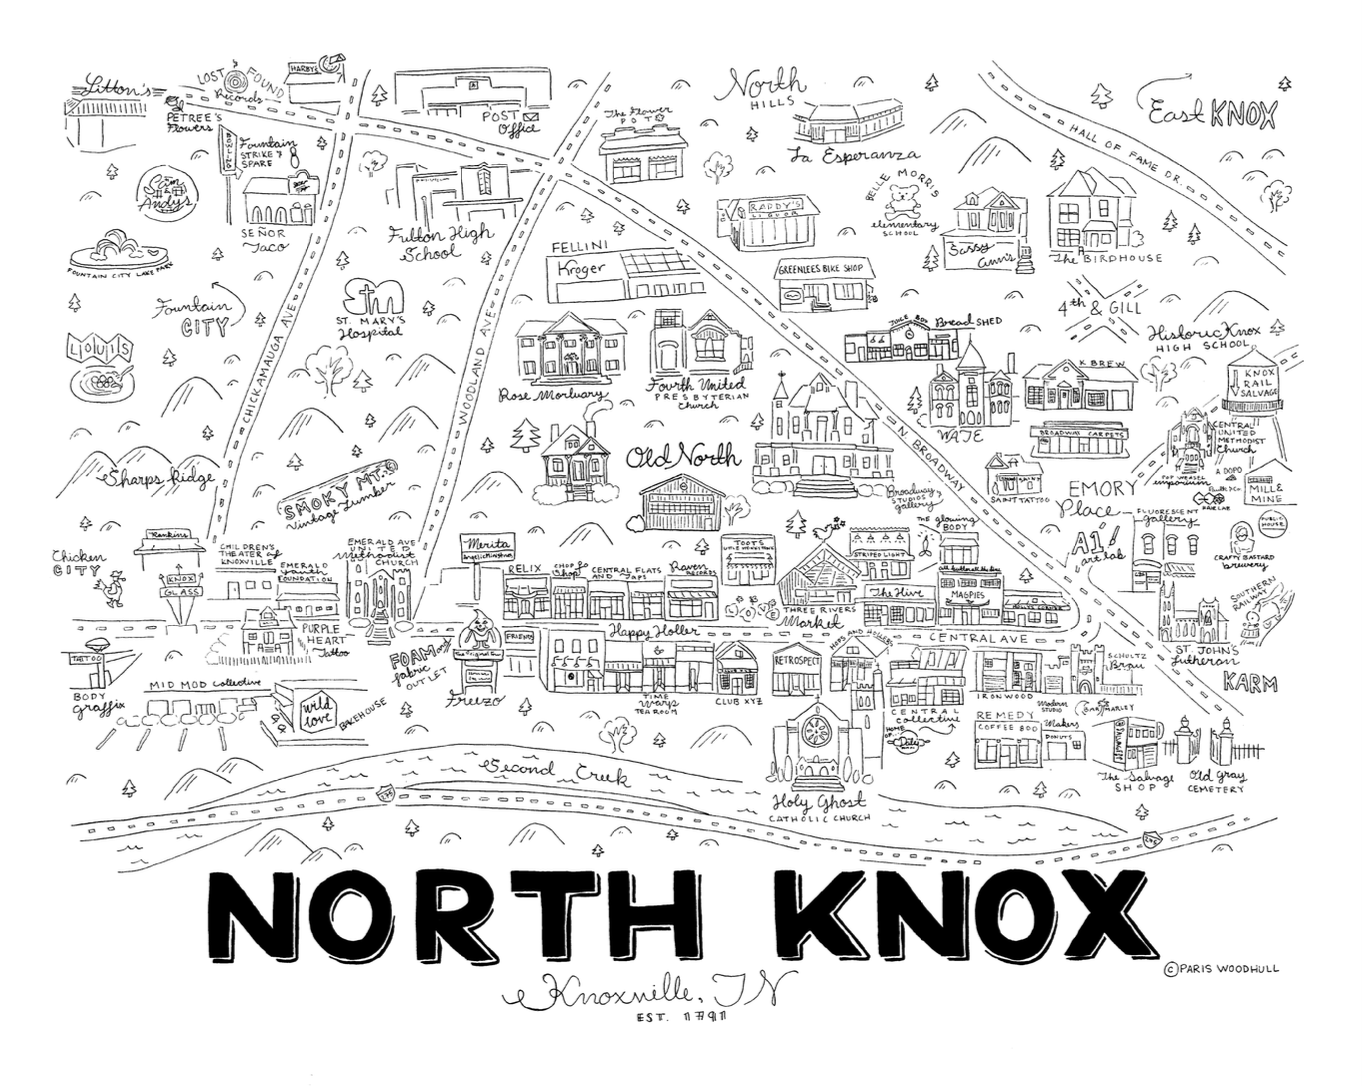 North Knoxville - Print - 16x20"